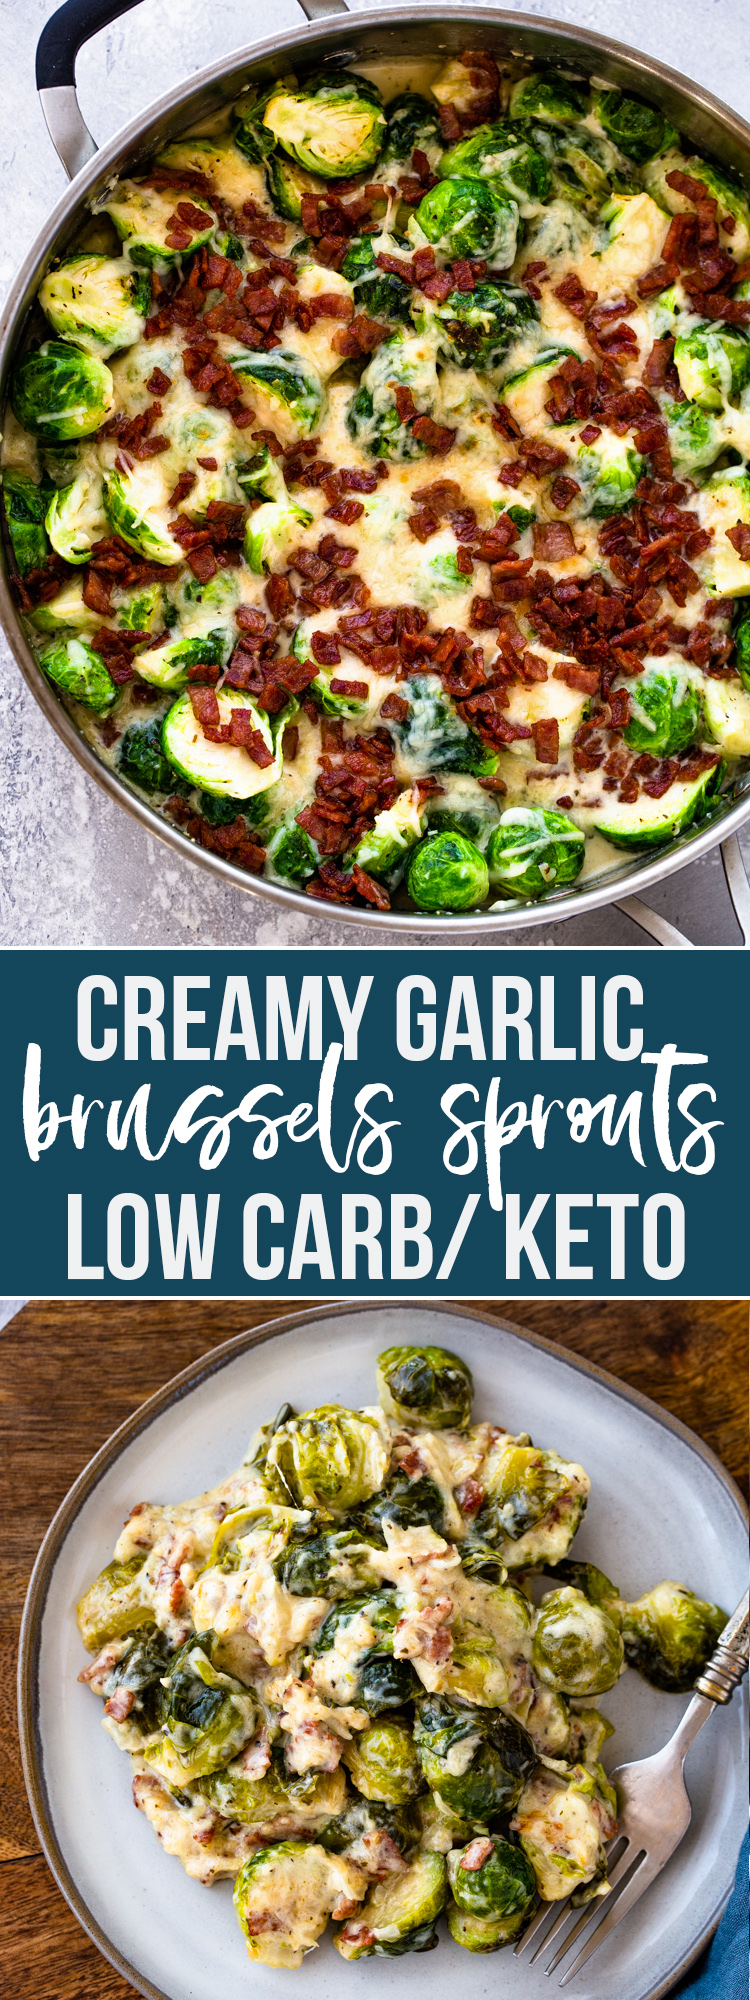 Creamy Garlic Parmesan Brussels Sprouts (Keto/Low Carb)